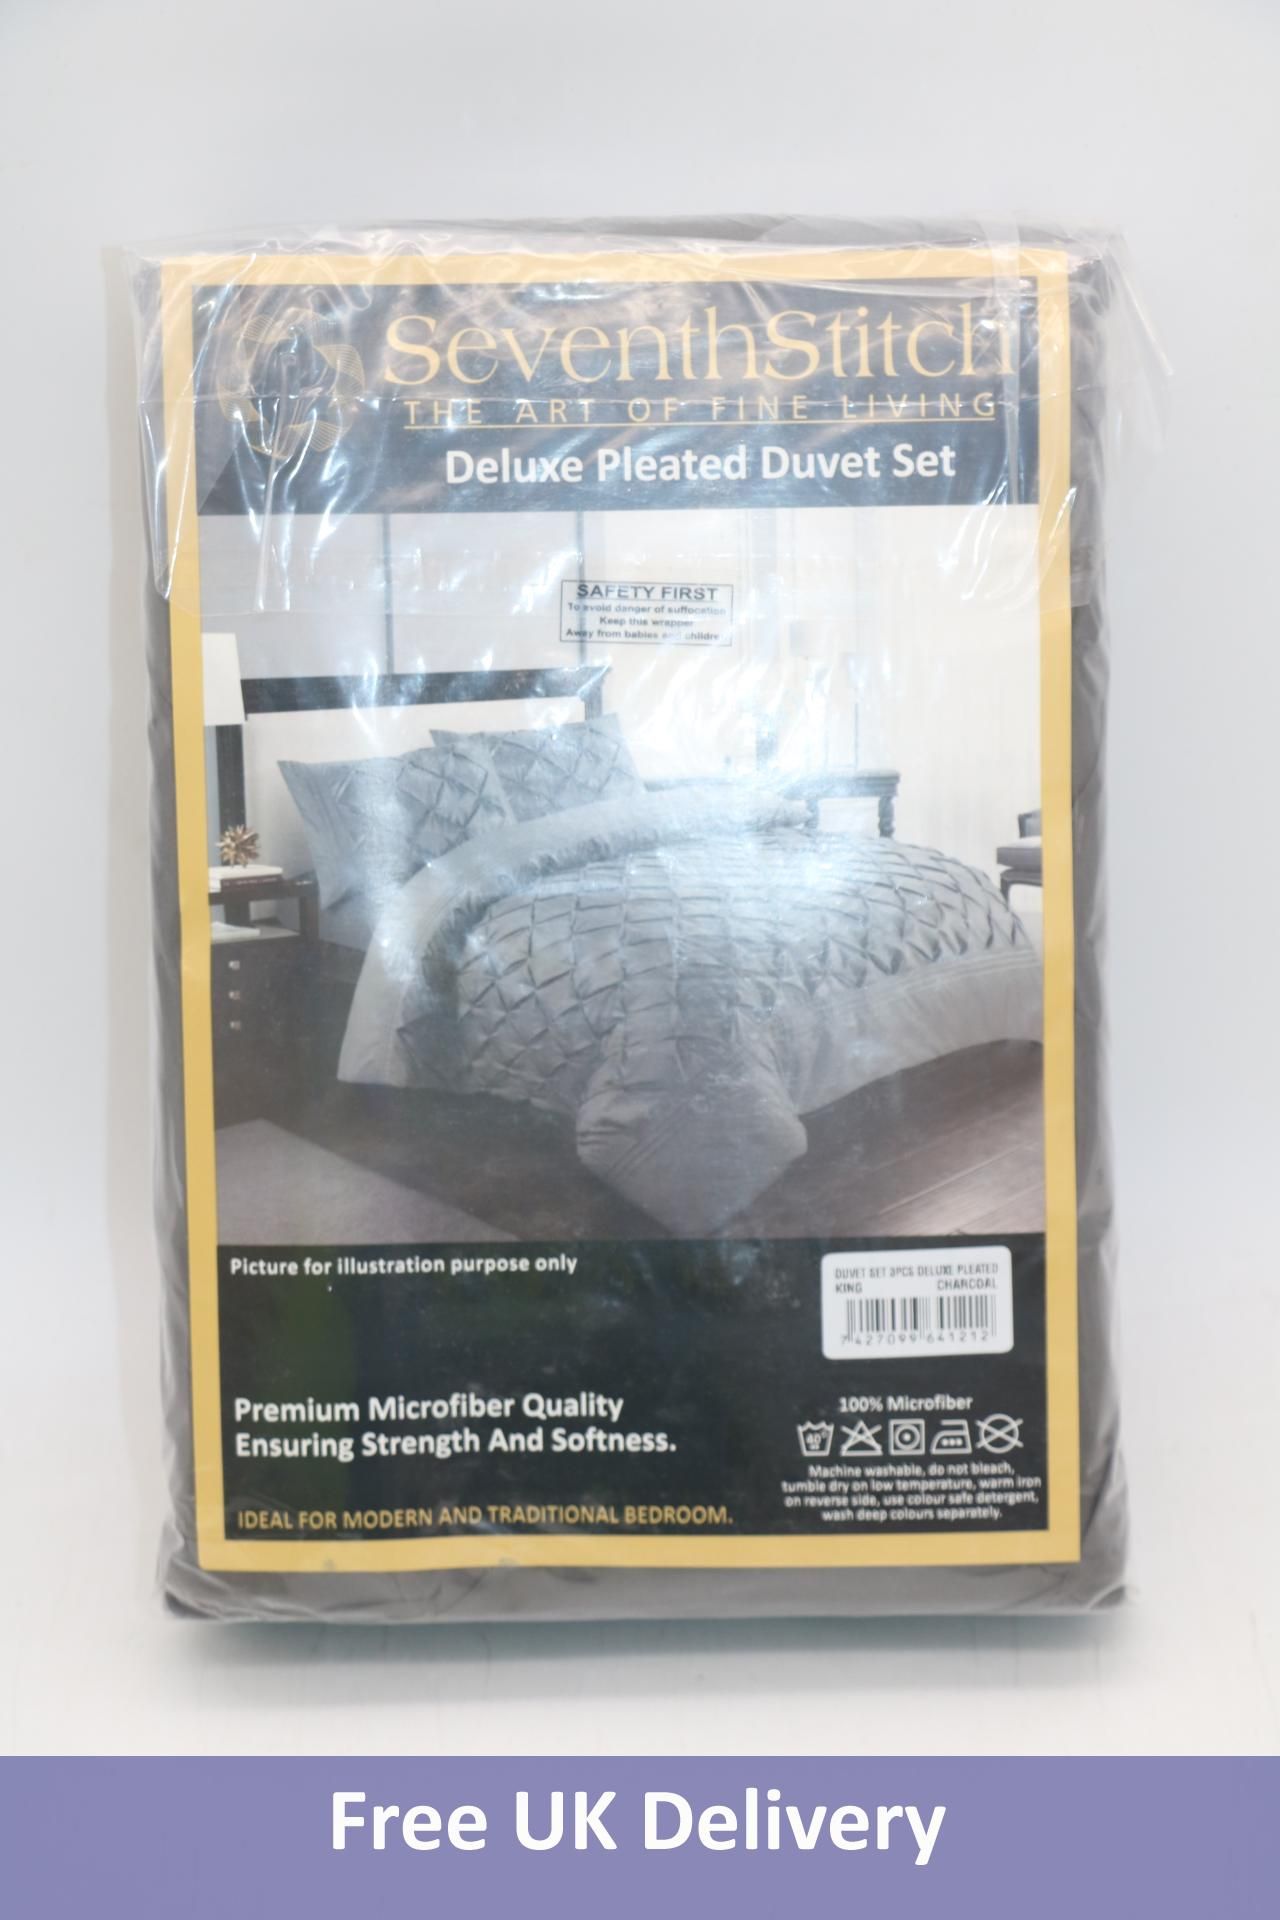 Four packs of Seventh Stitch Deluxe Pleated 3pcs Duvet Sets, each to include 1x Cover, 230 x 220cm,